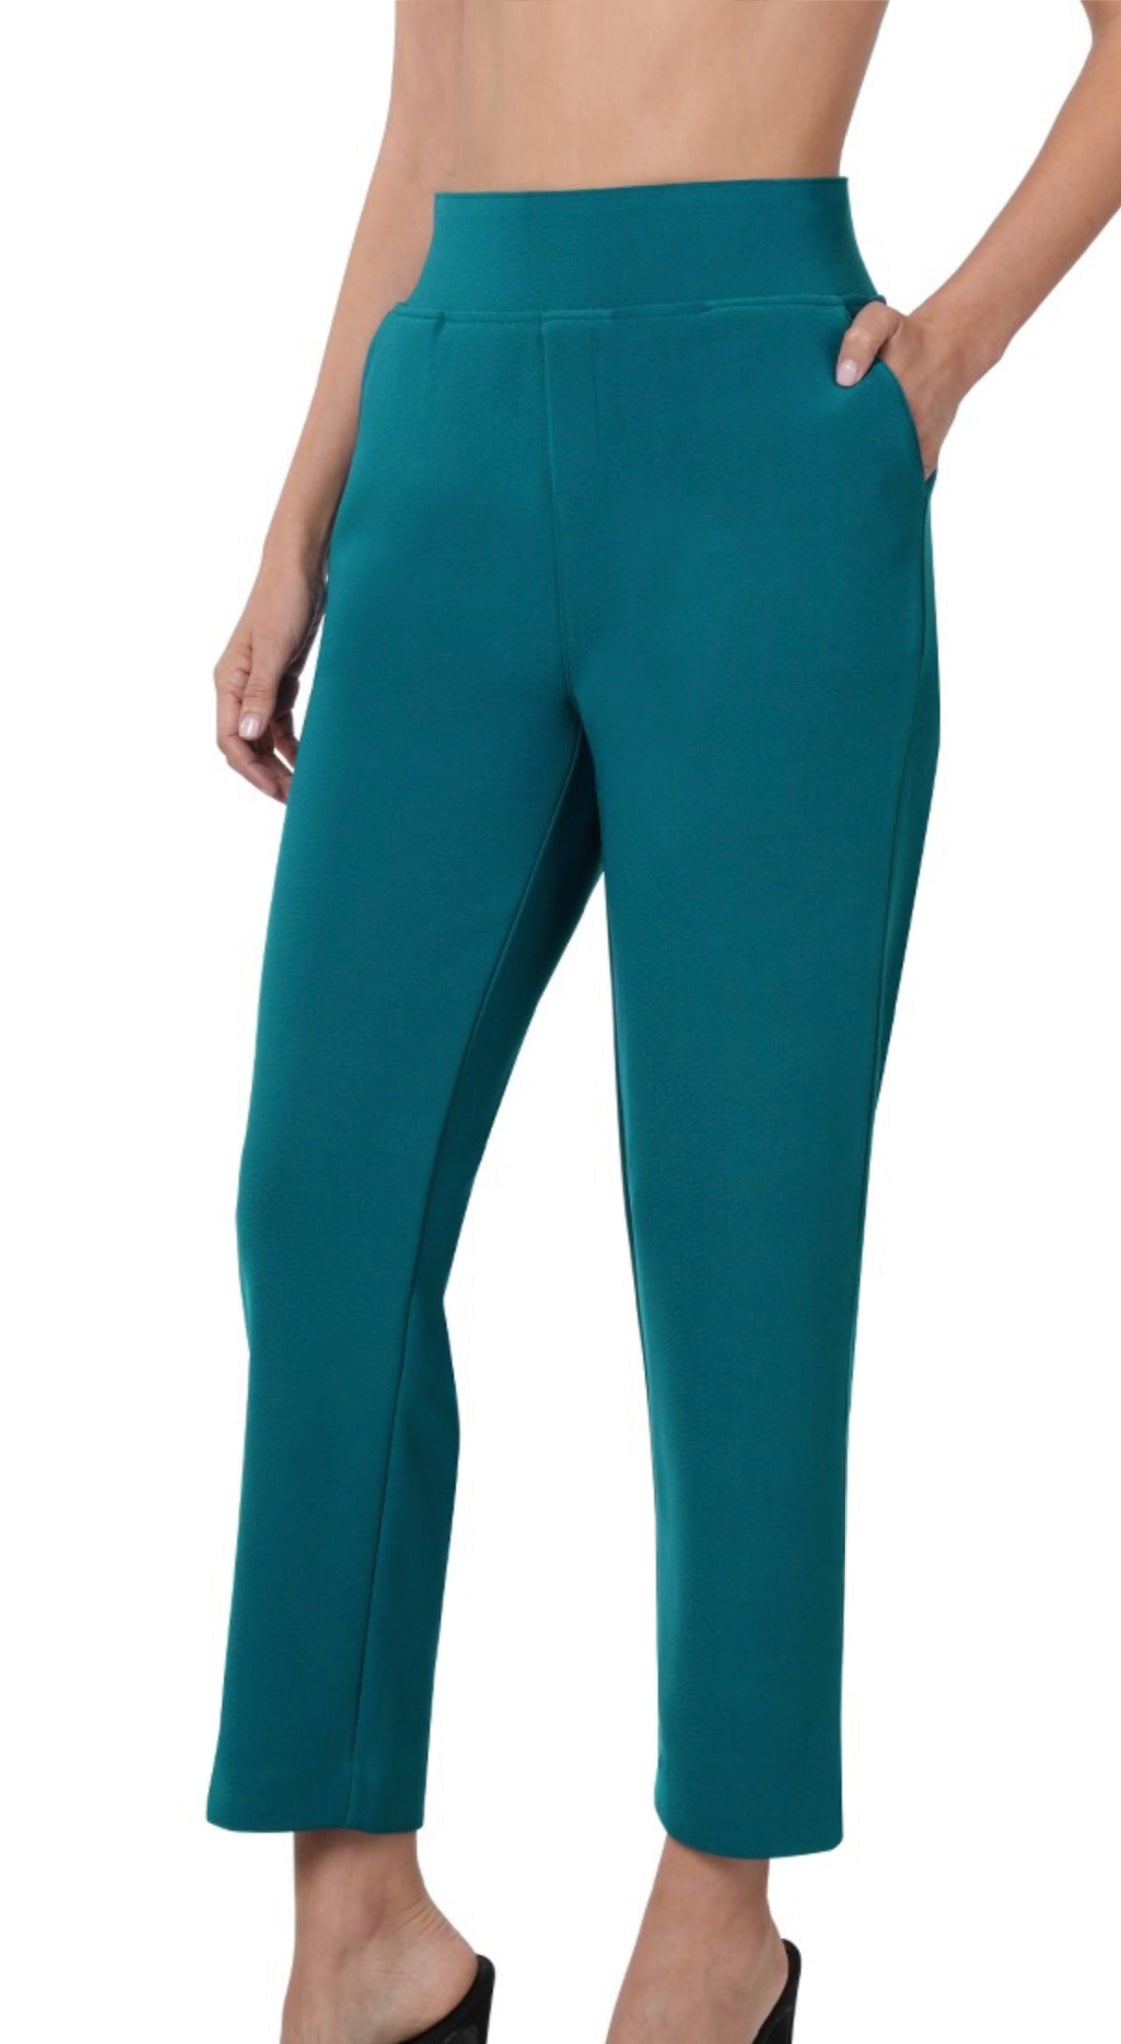 Delightful Must Have Pull On Work Pants in Teal and Ash Grey